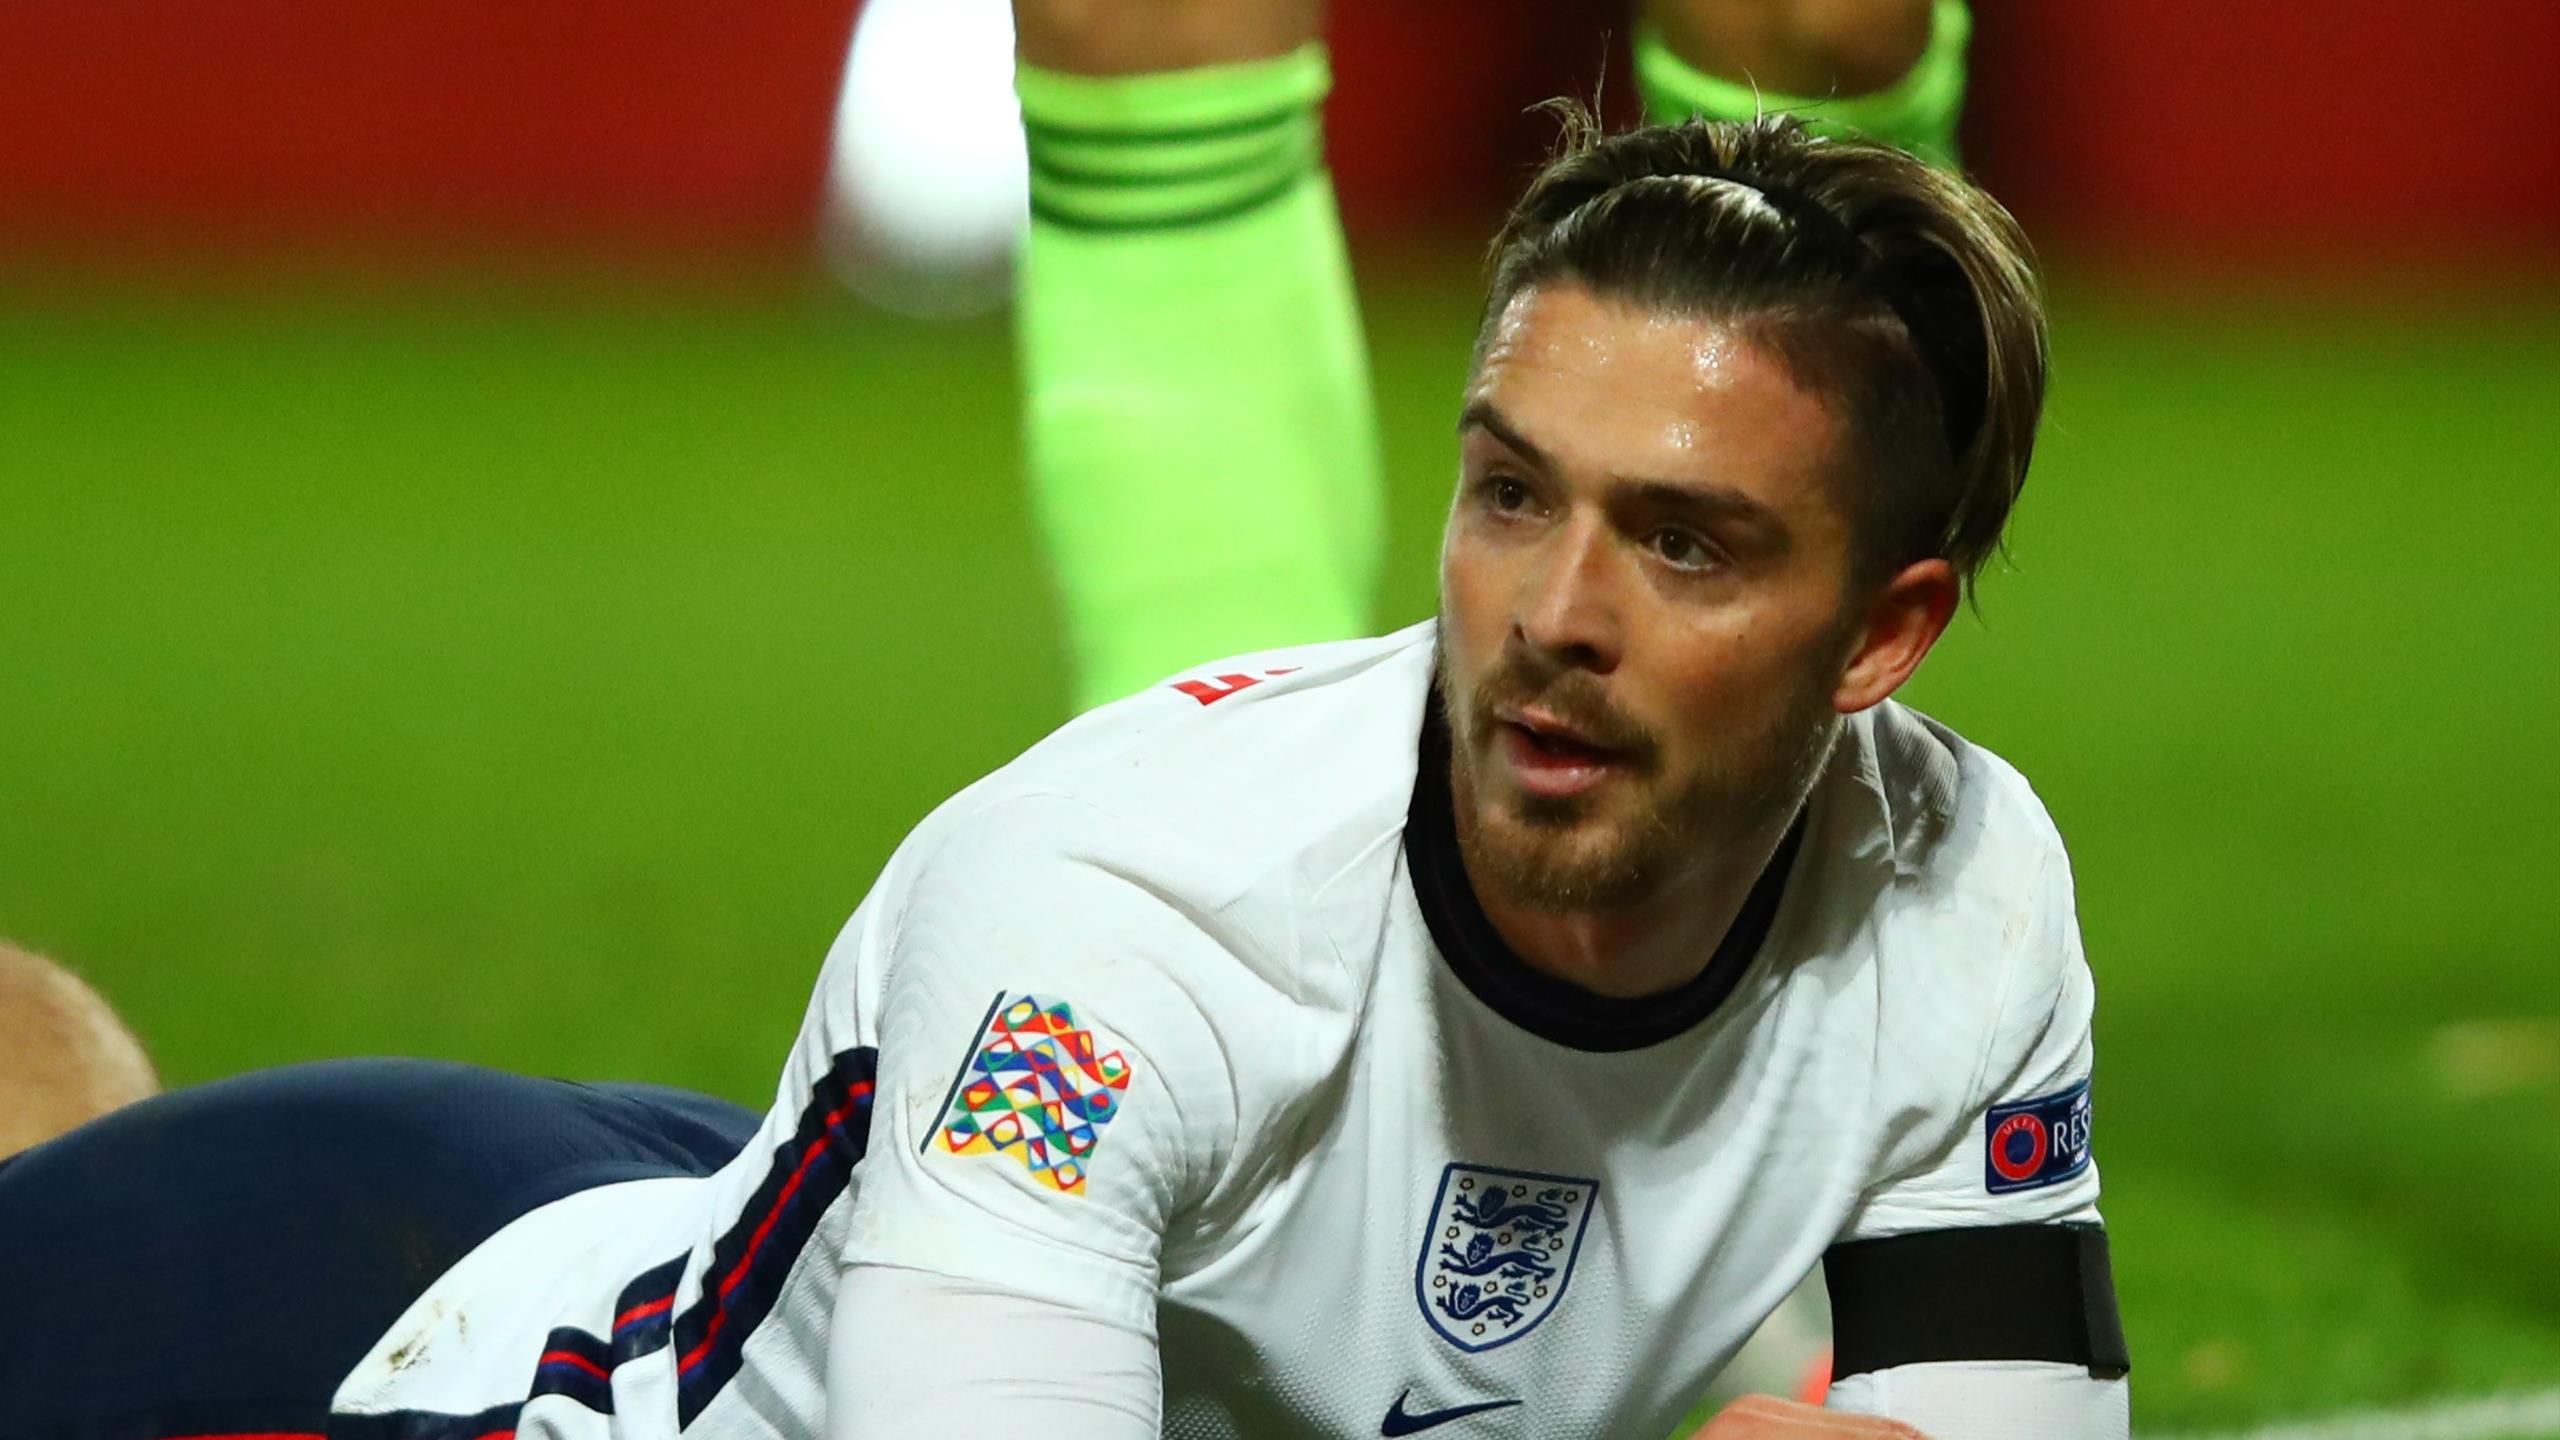 Euro 2020 News For Grealish? 3 England Players Set To Benefit From Switch To 26 Man Squads